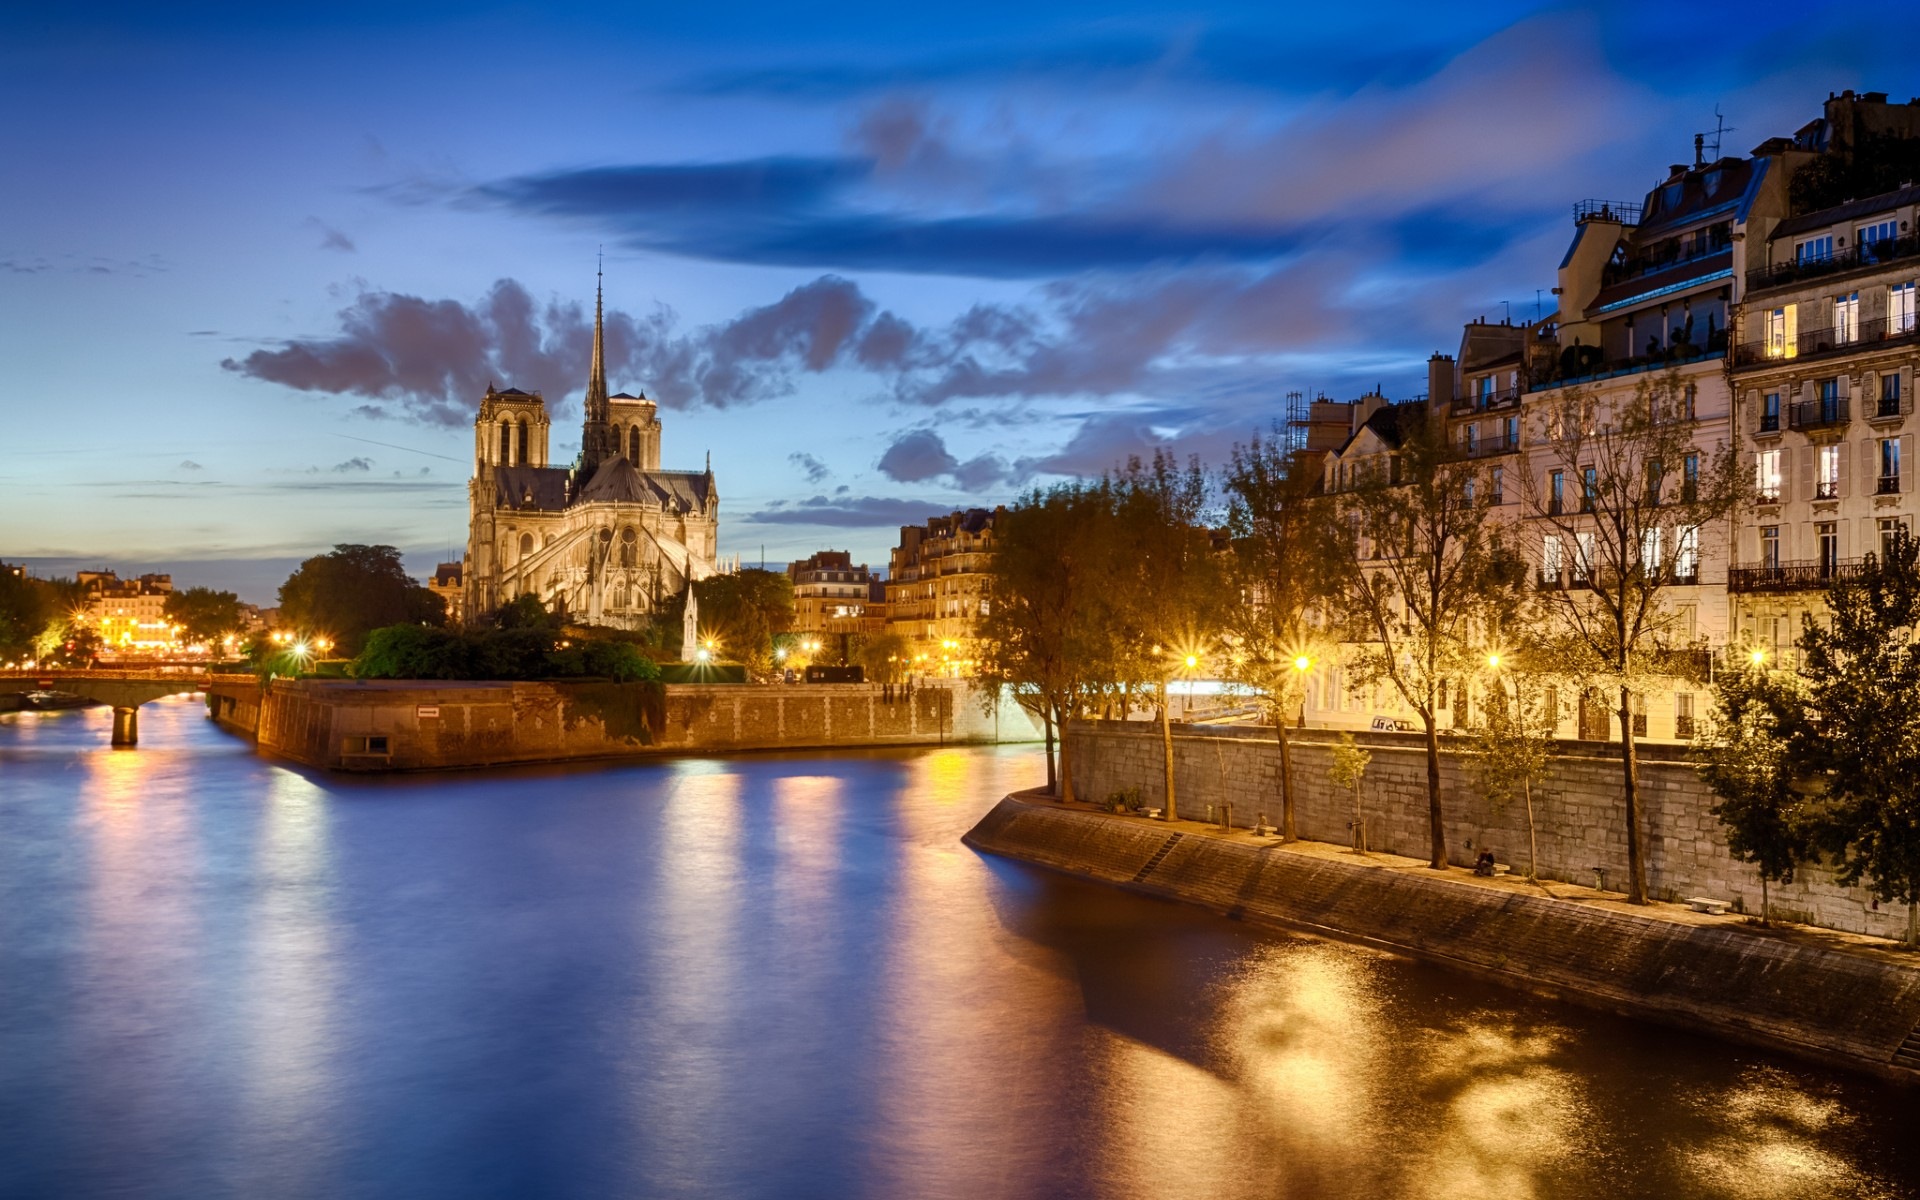 Notre Dame HD Wallpapers #1 - 1920x1200